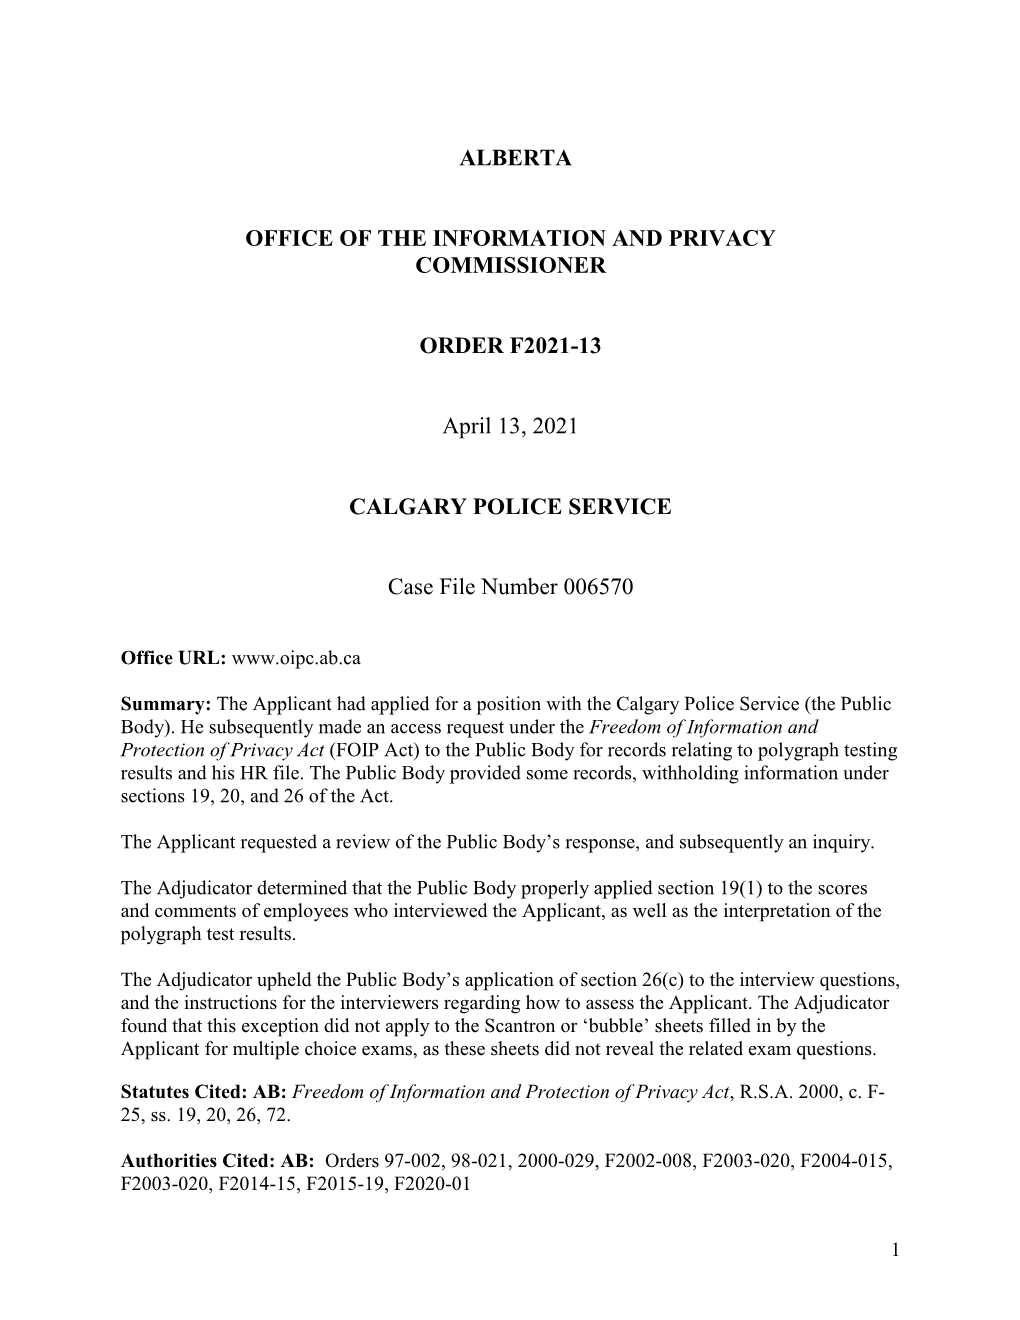 ALBERTA OFFICE of the INFORMATION and PRIVACY COMMISSIONER ORDER F2021-13 April 13, 2021 CALGARY POLICE SERVICE Case File Numbe